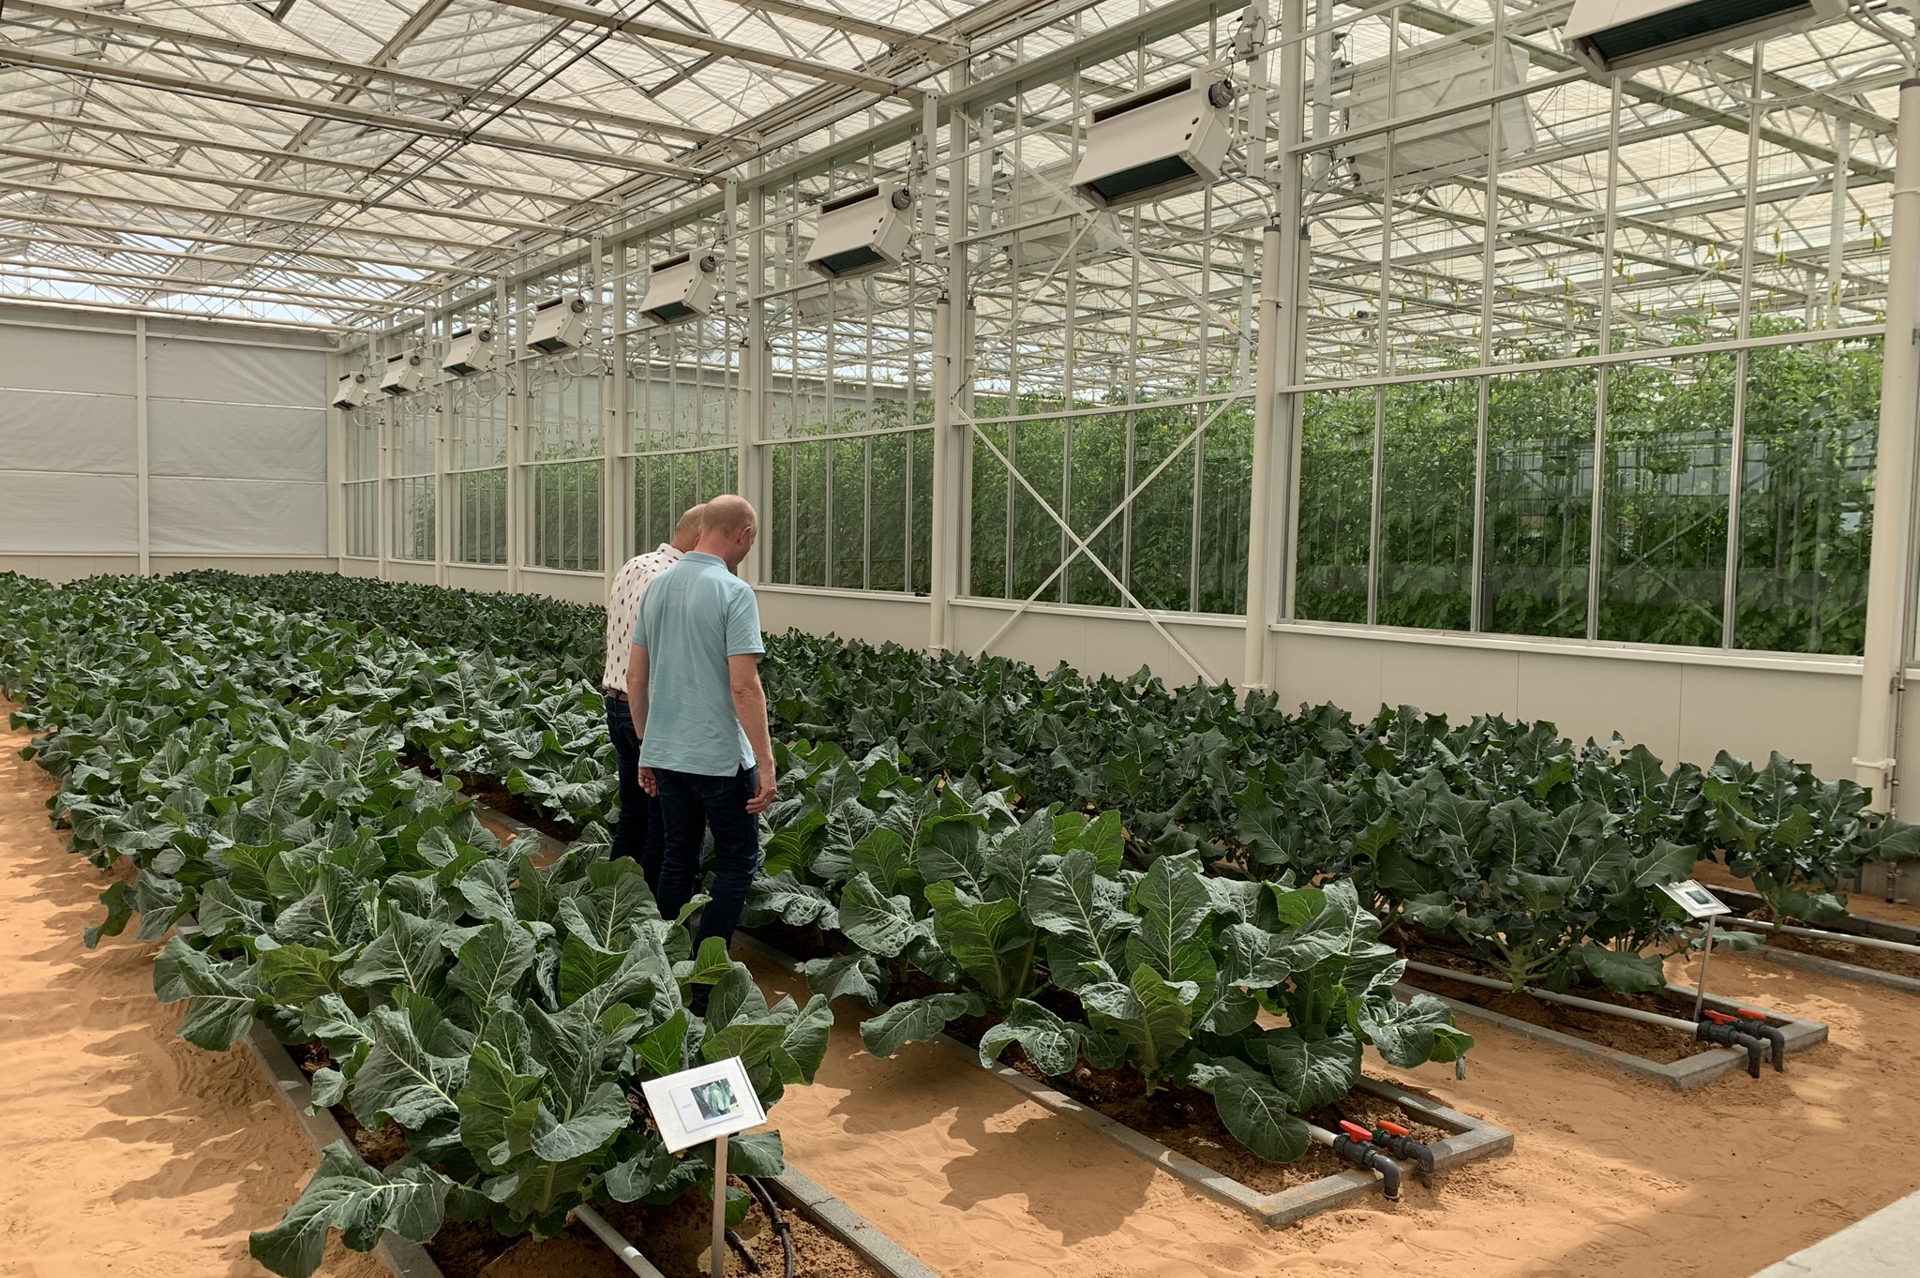 Greenhouse Grower Services